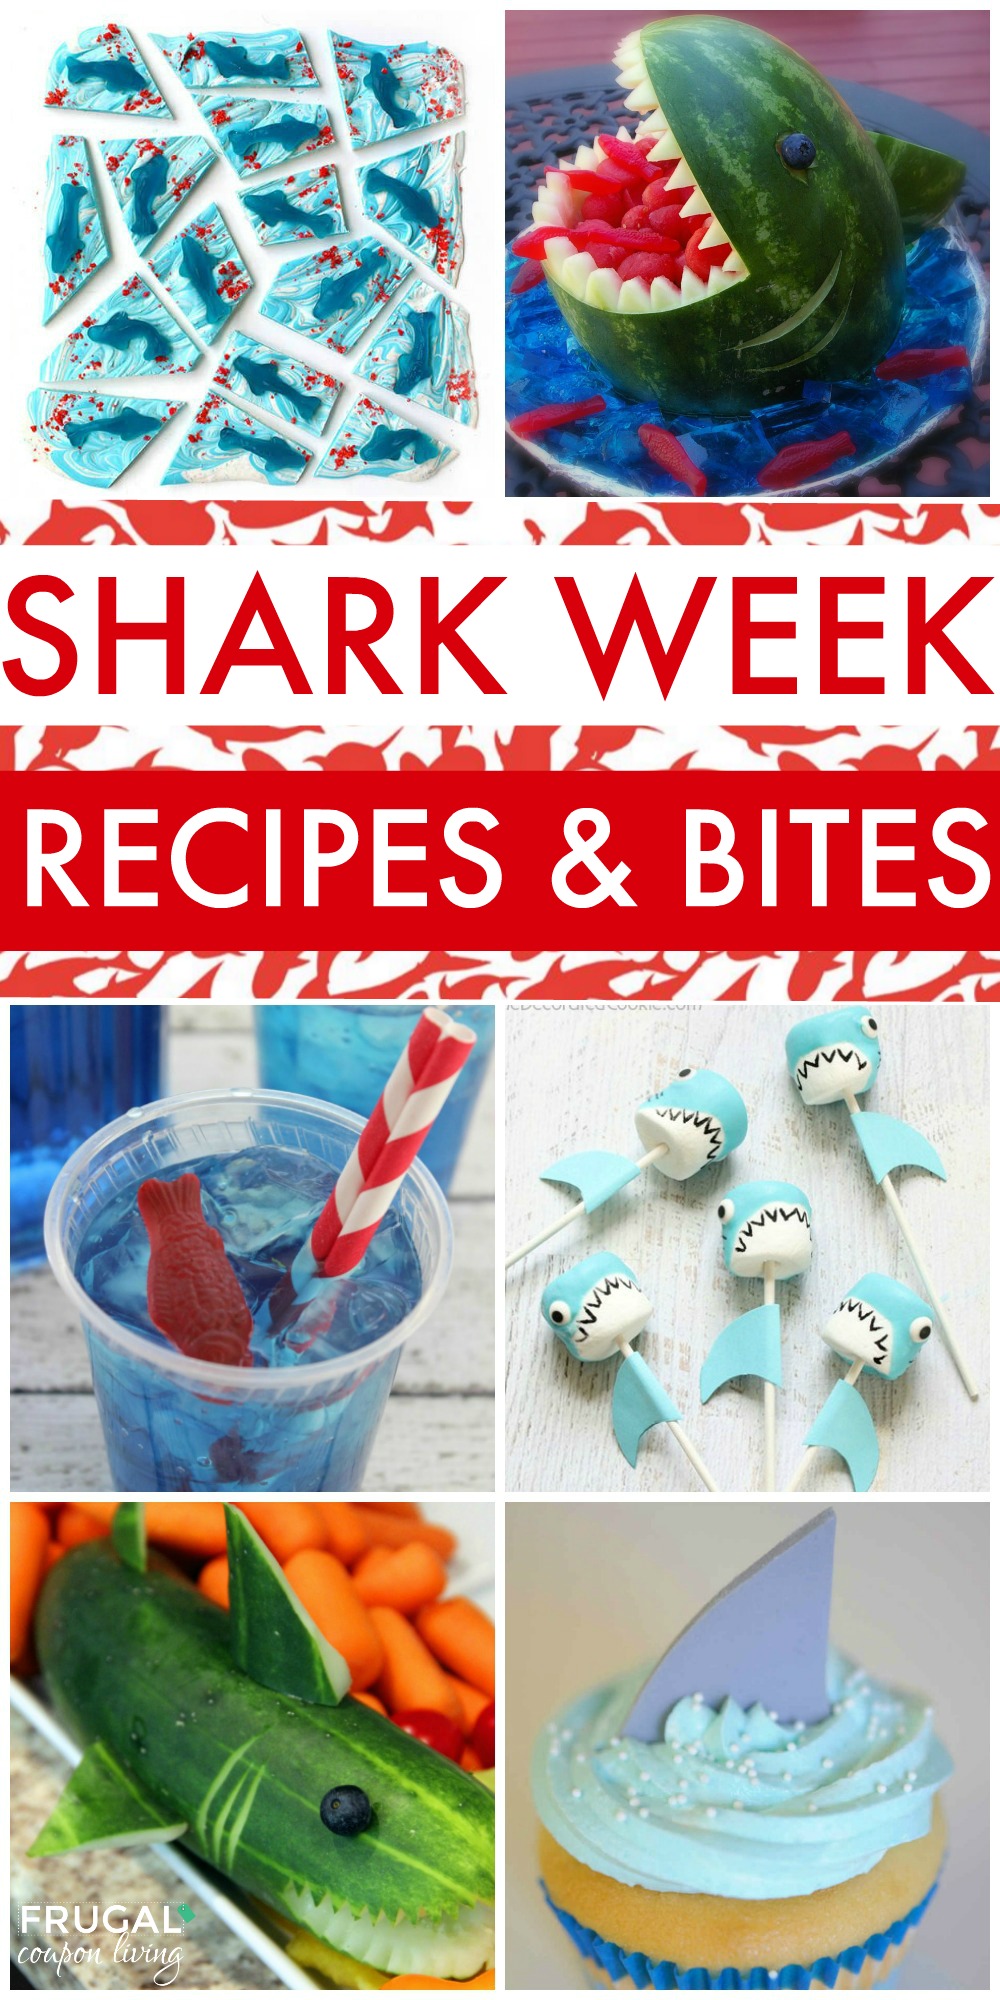 shark-food-collage-frugal-coupon-living